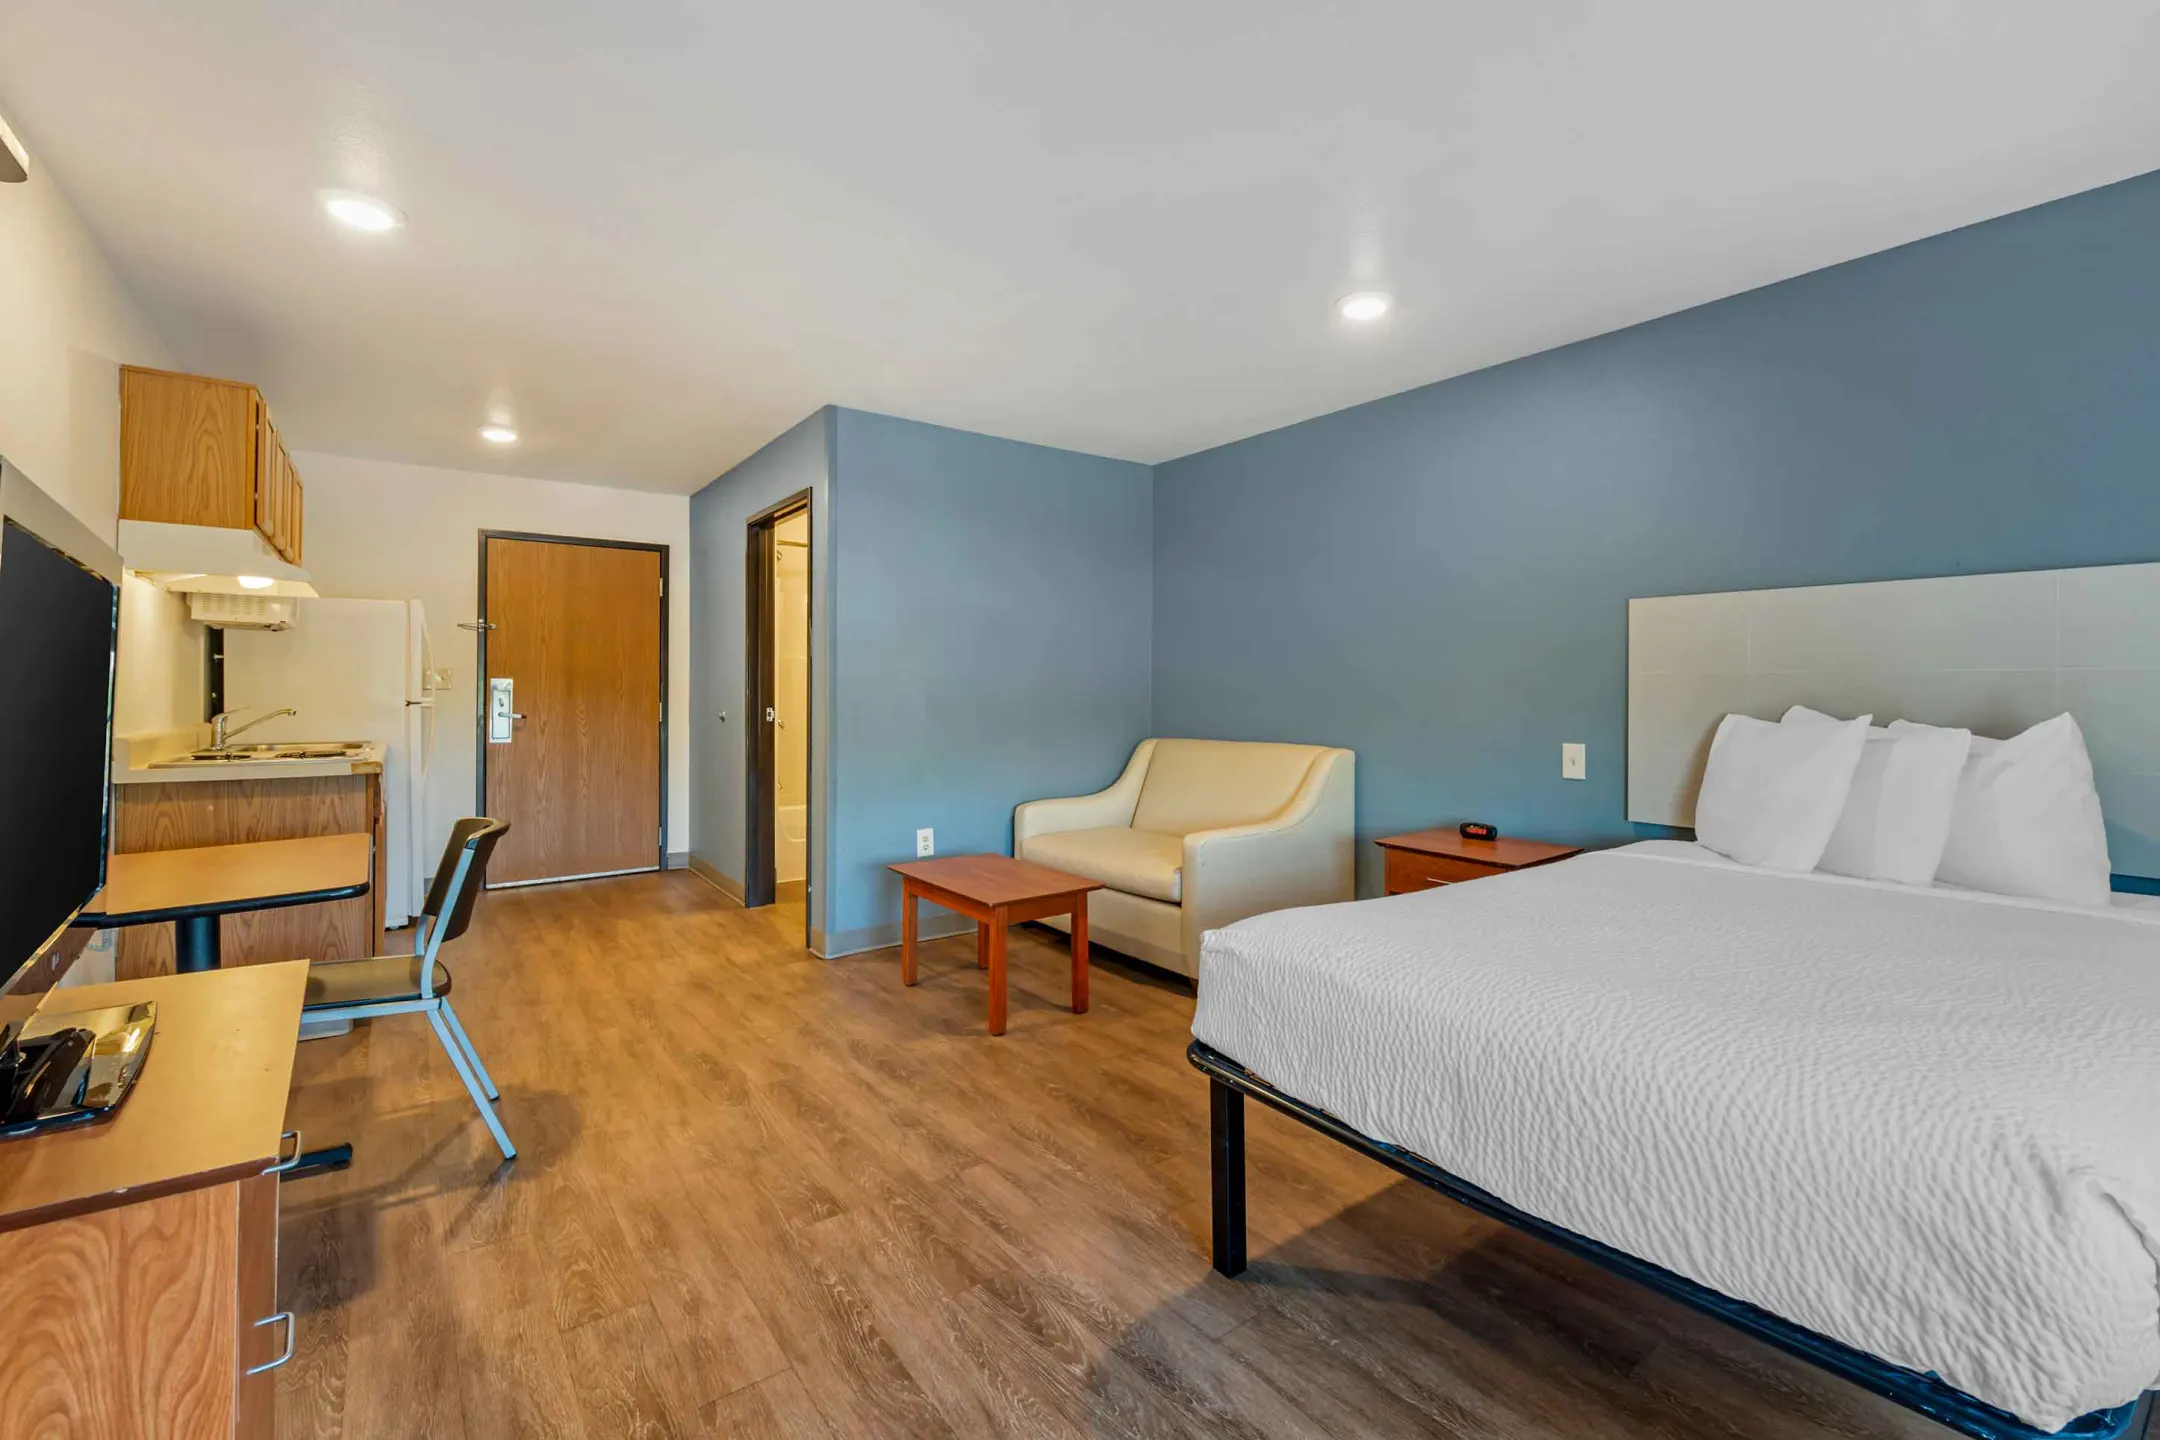 Bedroom - Furnished Studio - Indianapolis - Lawrence - Indianapolis, IN